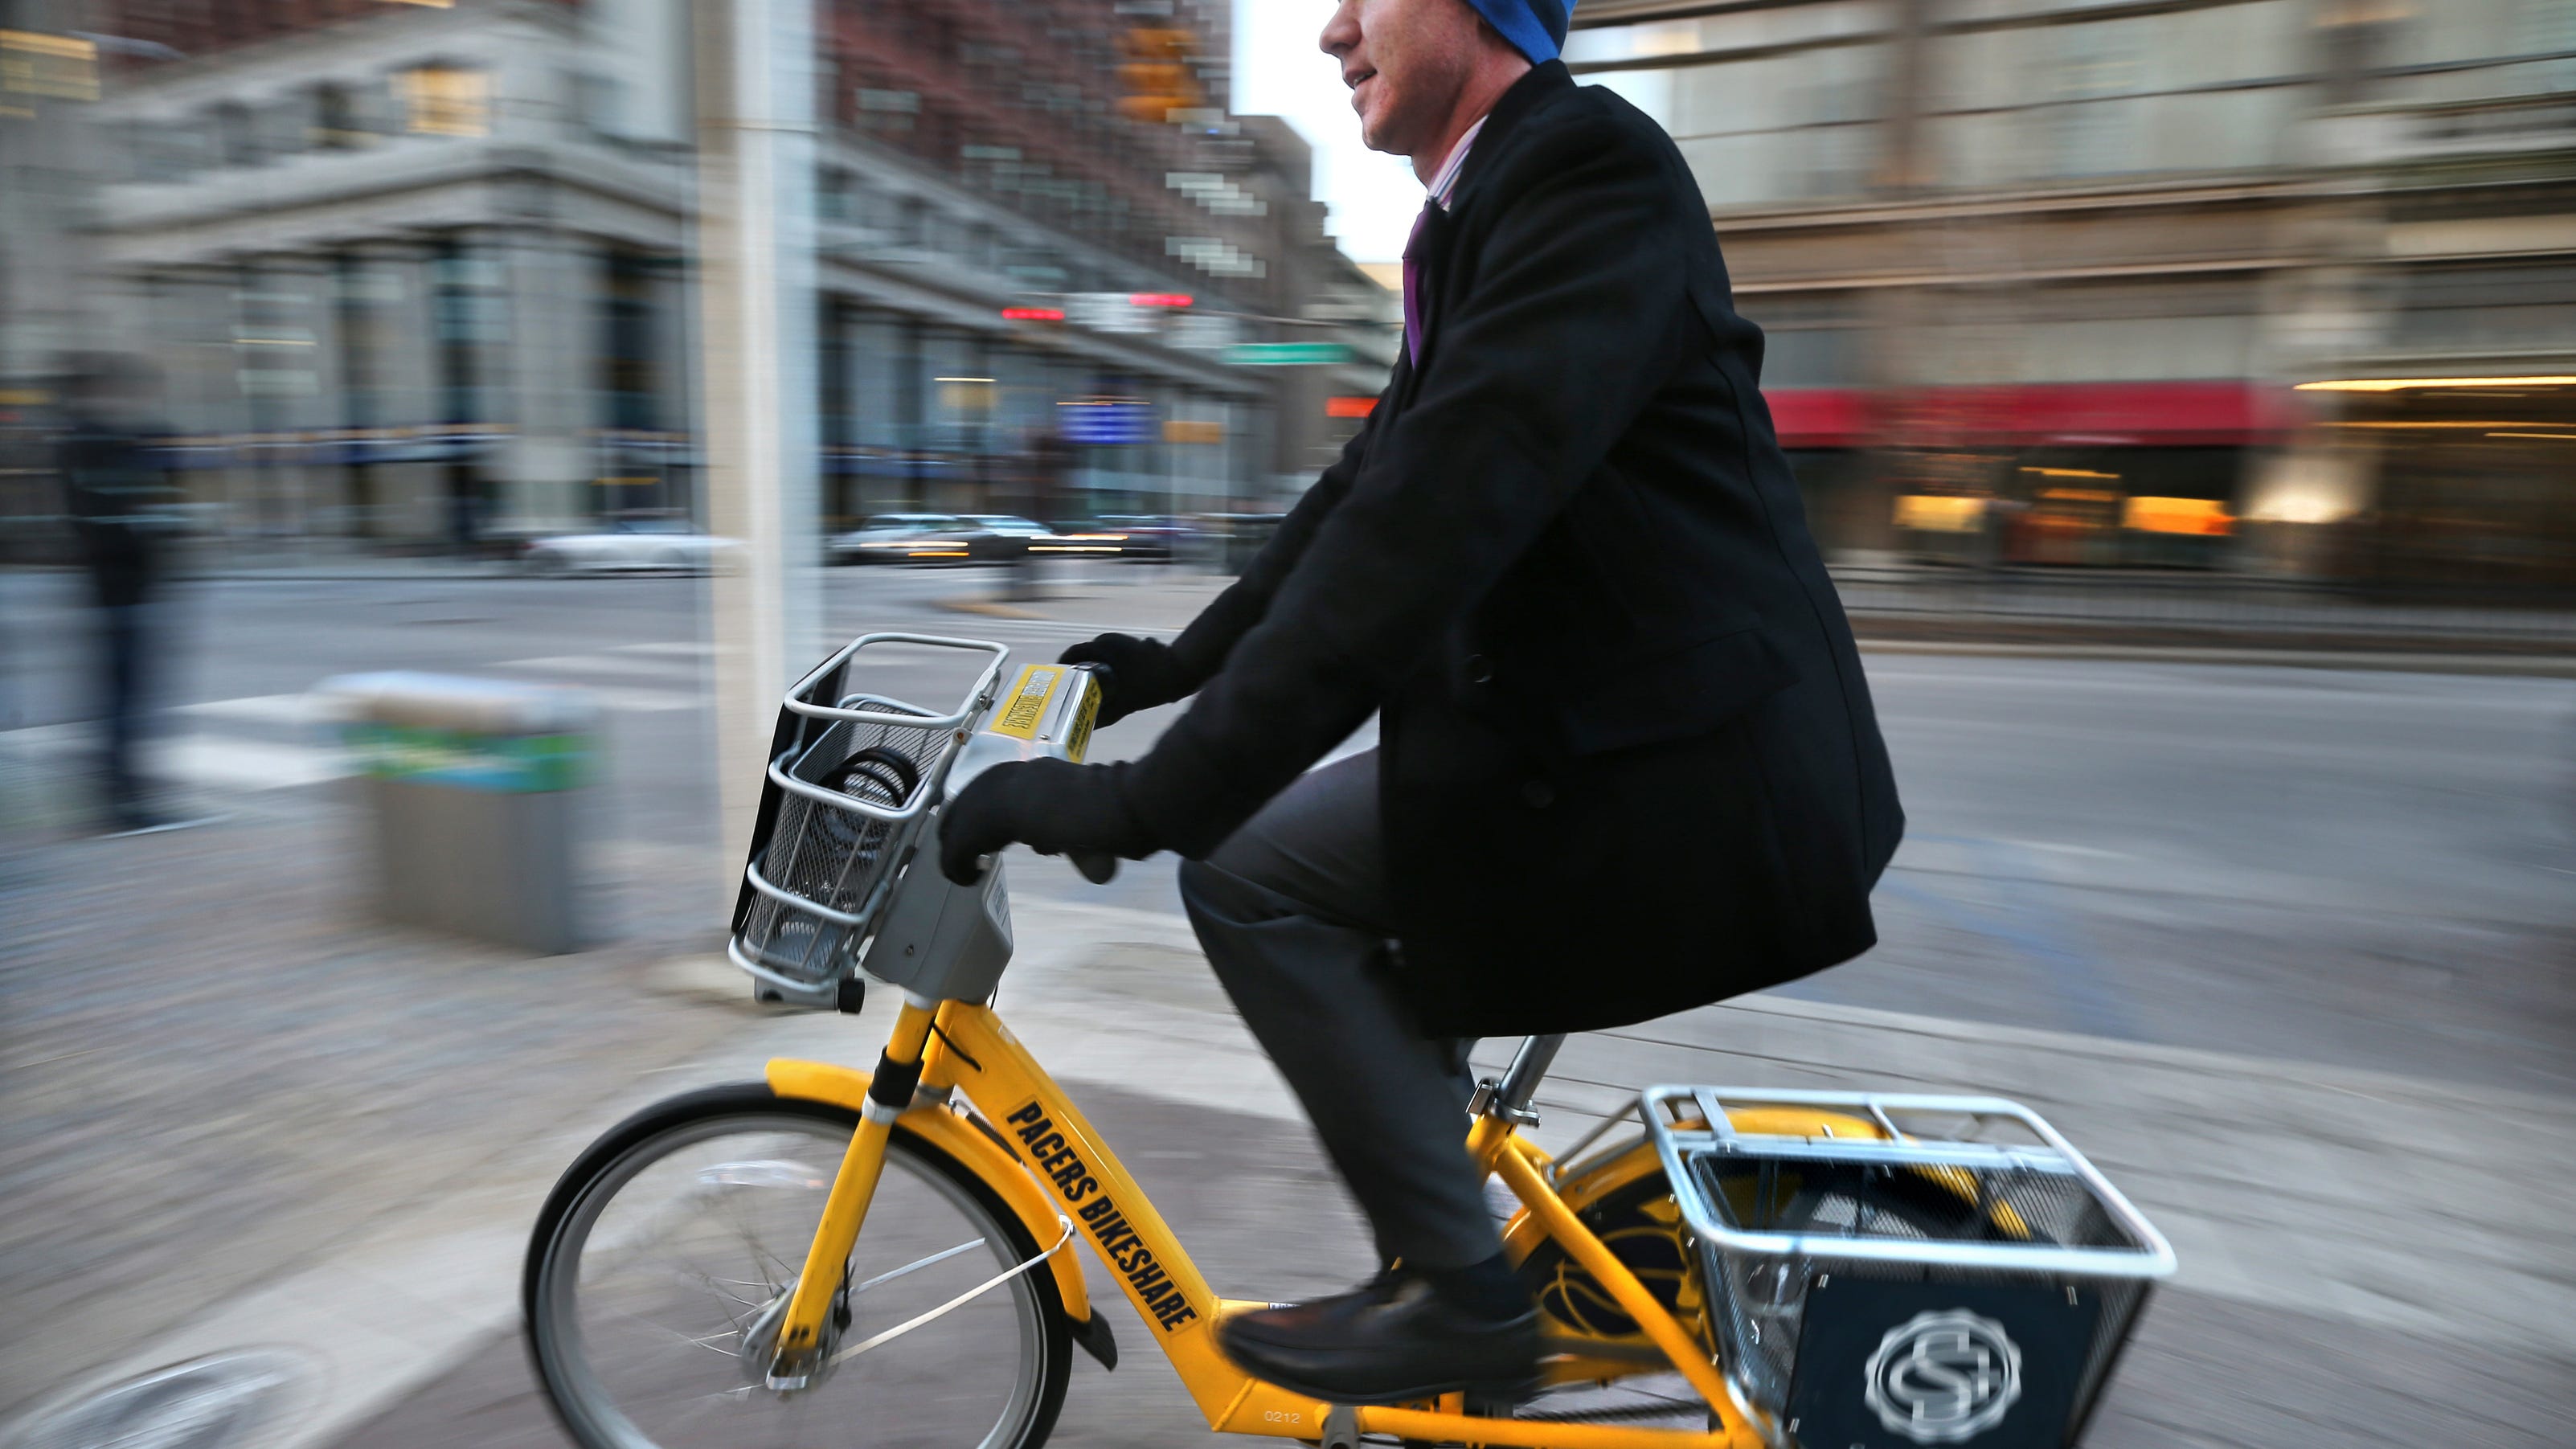 He rode 600 miles on Indy's rental bikes last year - Indianapolis Star